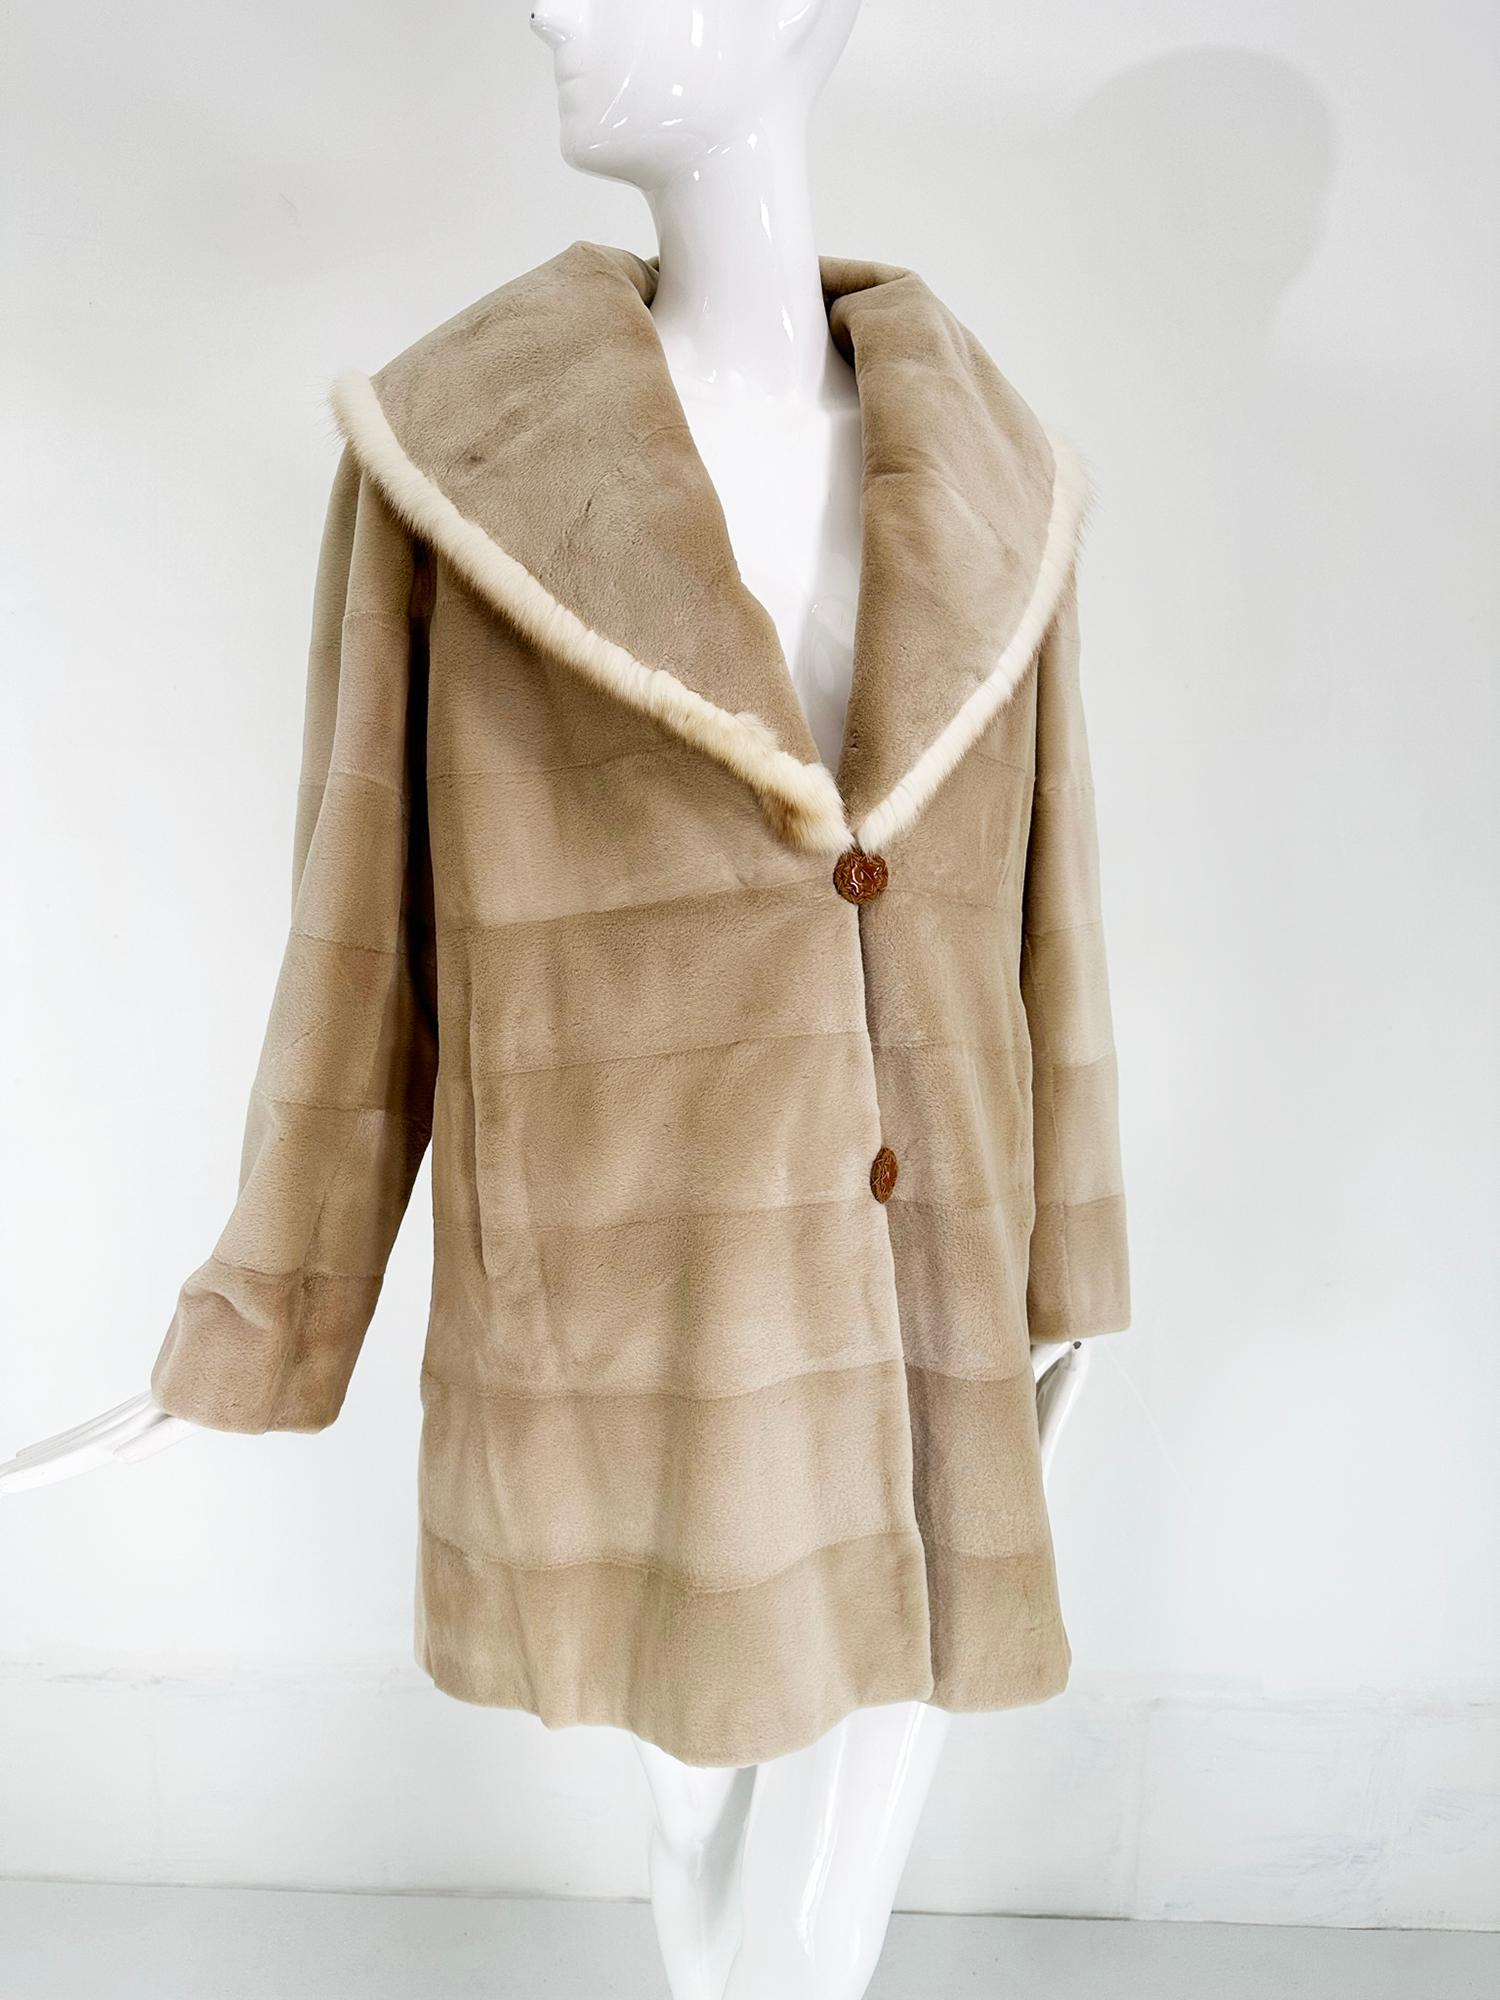 Champagne blond sheared mink reversible jacket with a full shawl collar. This beautiful jacket is very soft and is reversible to a taupe polished cotton blend fabric. The lining has hand stitched decorative detail. The coat closes with handmade